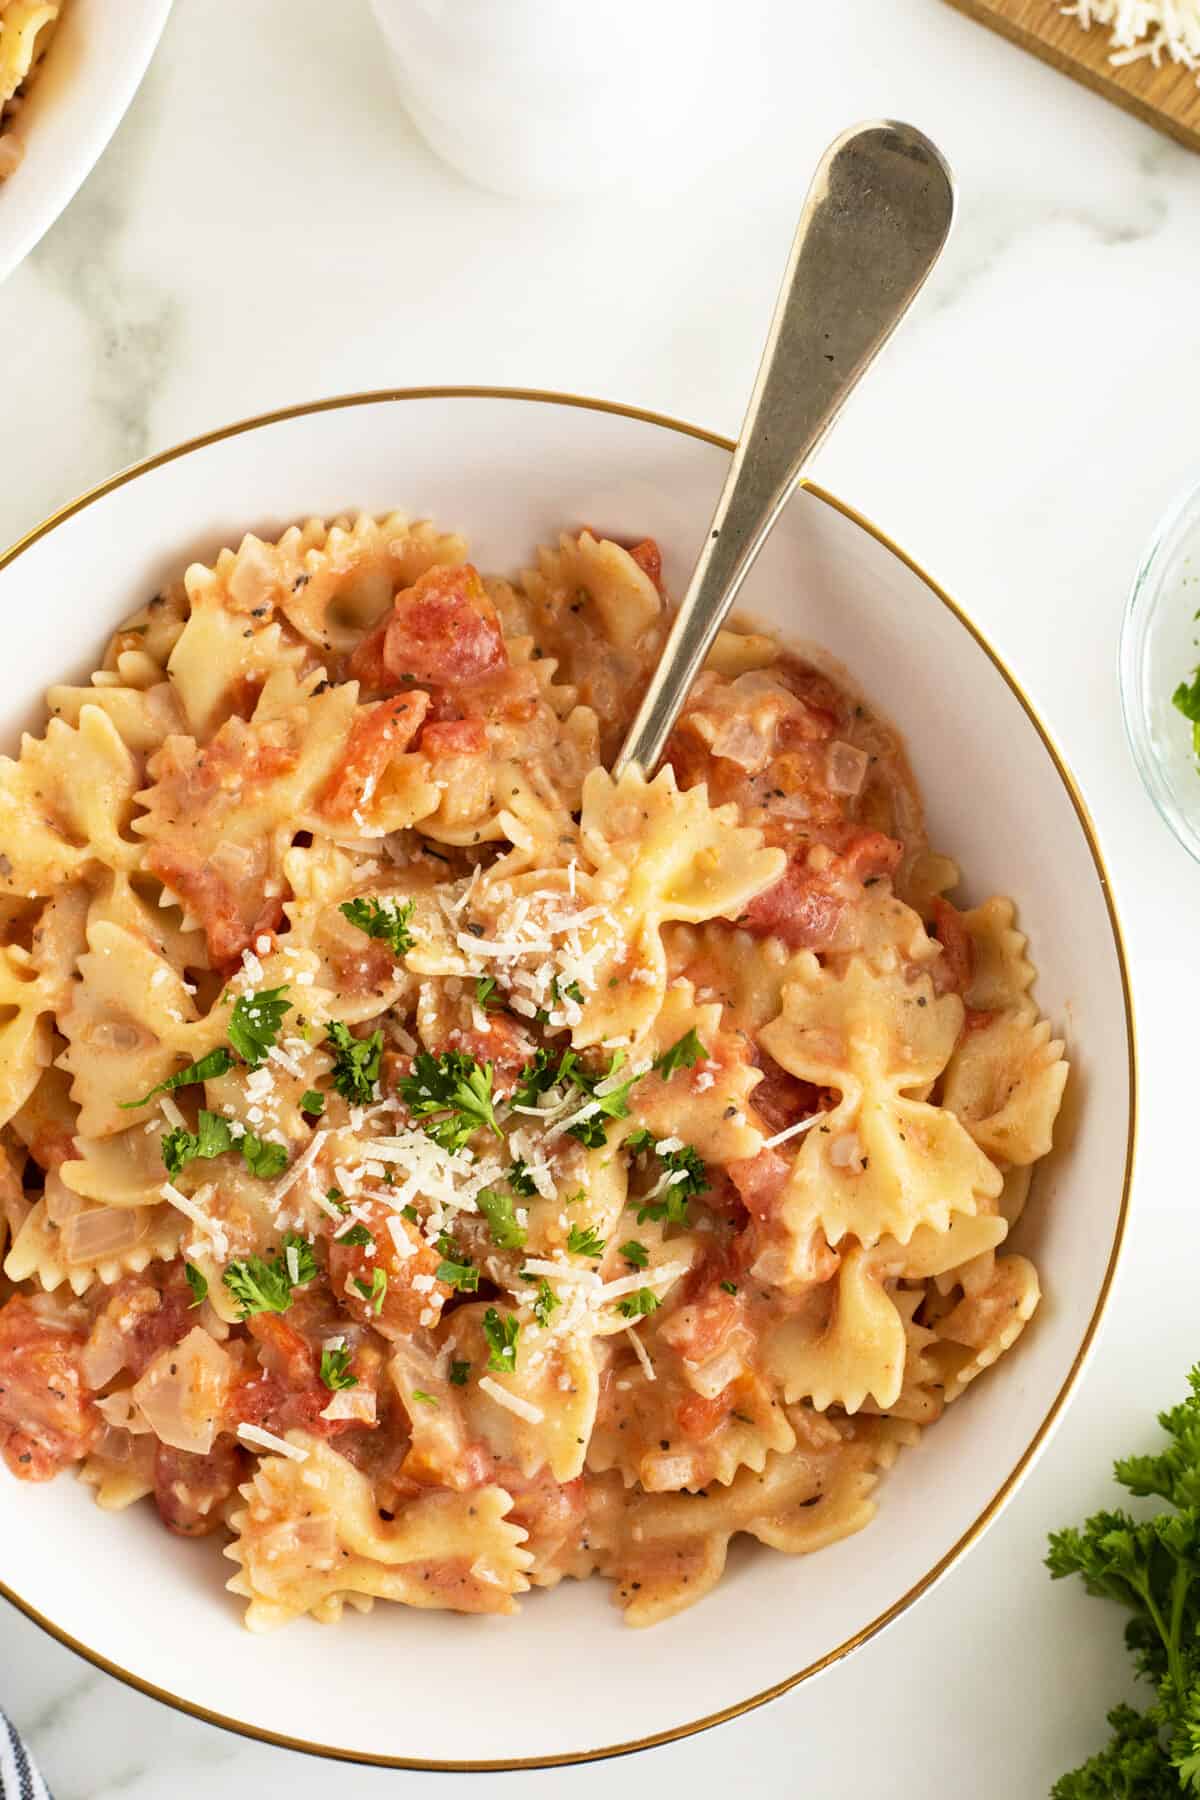 Tomato cream sauce in a bowl with pasta and garnished with parsley